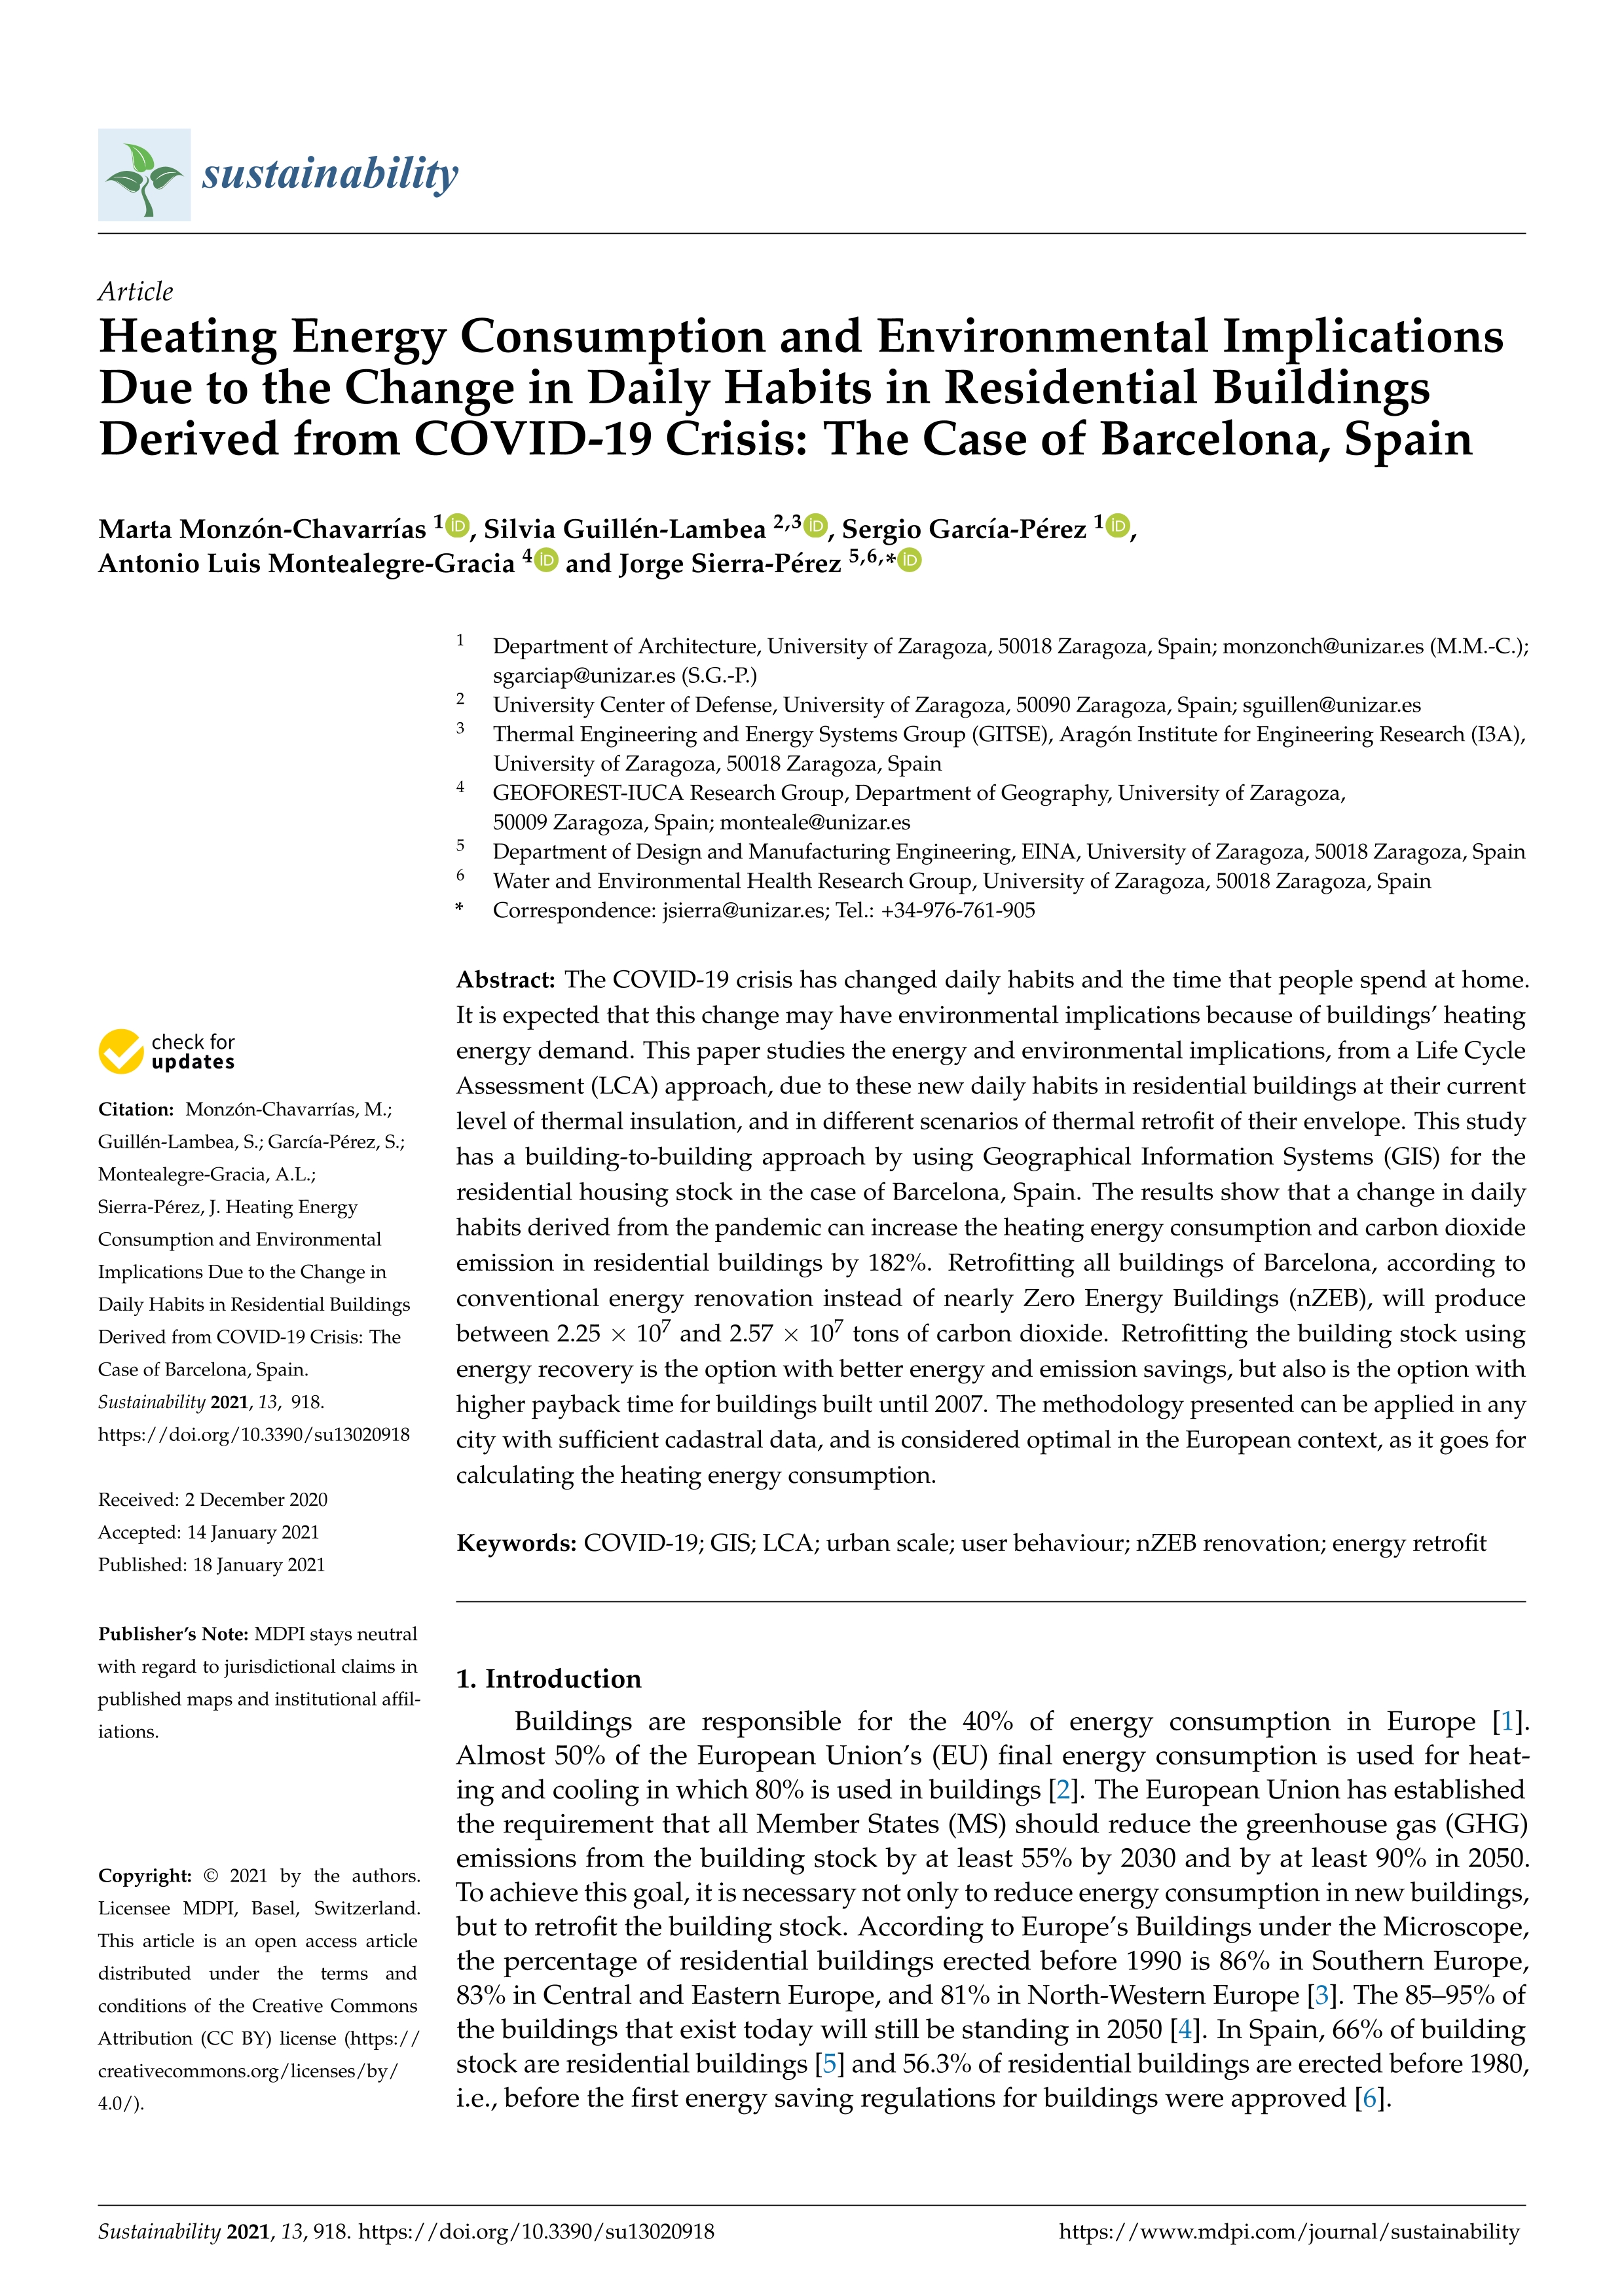 Heating energy consumption and environmental implications due to the change in daily habits in residential buildings derived from COVID-19 crisis: The case of Barcelona, Spain